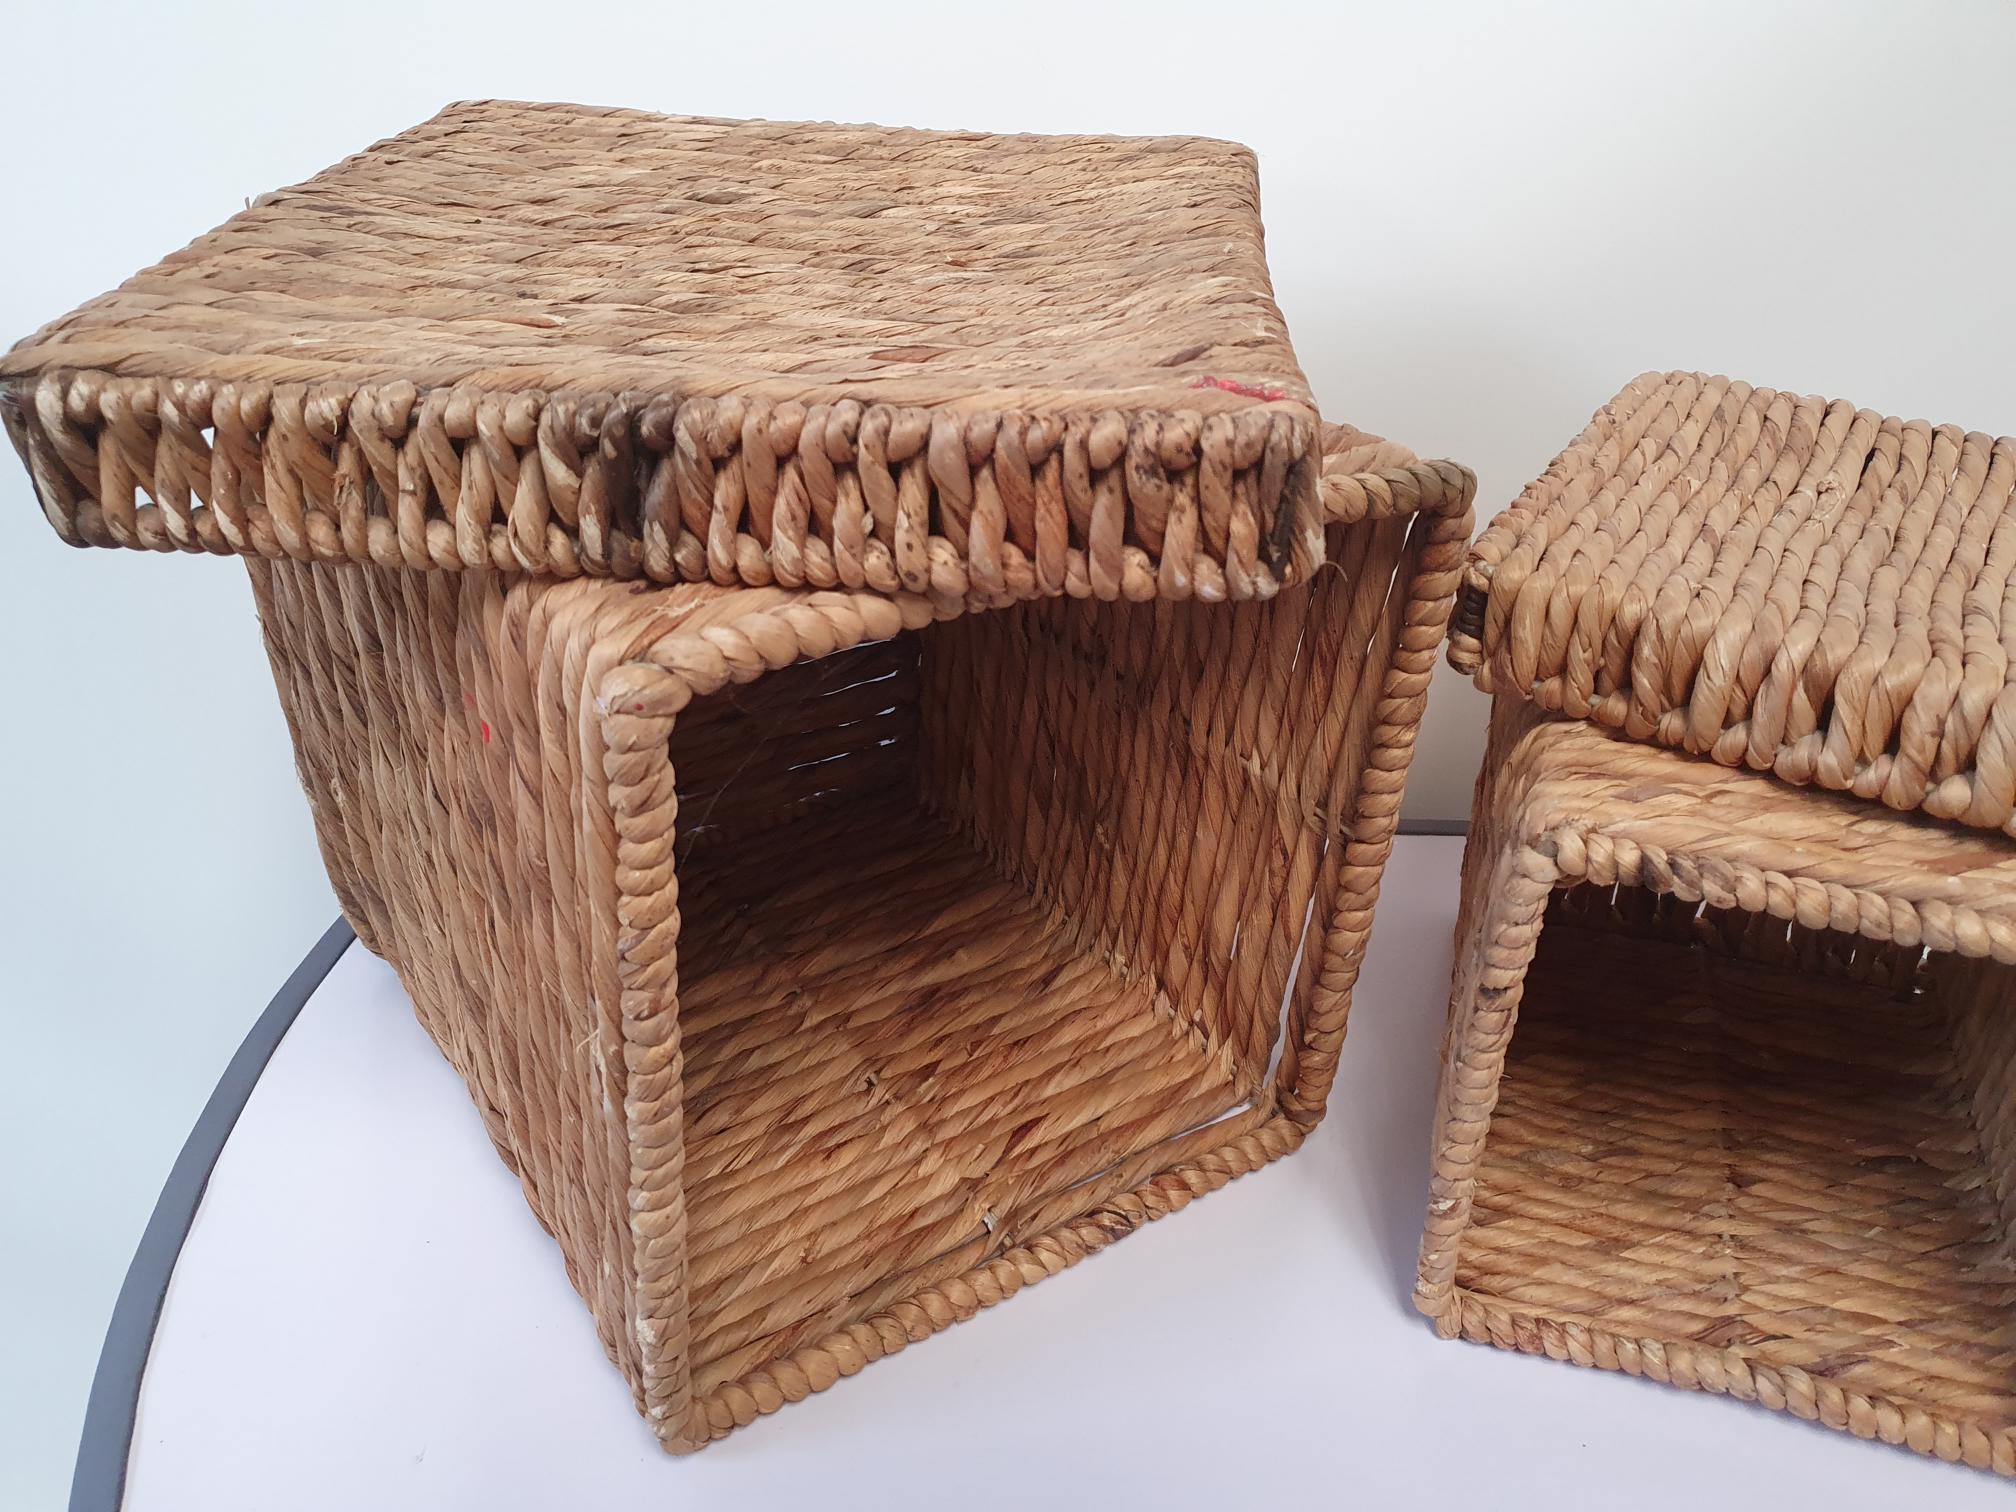 Wicker Pair Baskets - Image 5 of 6